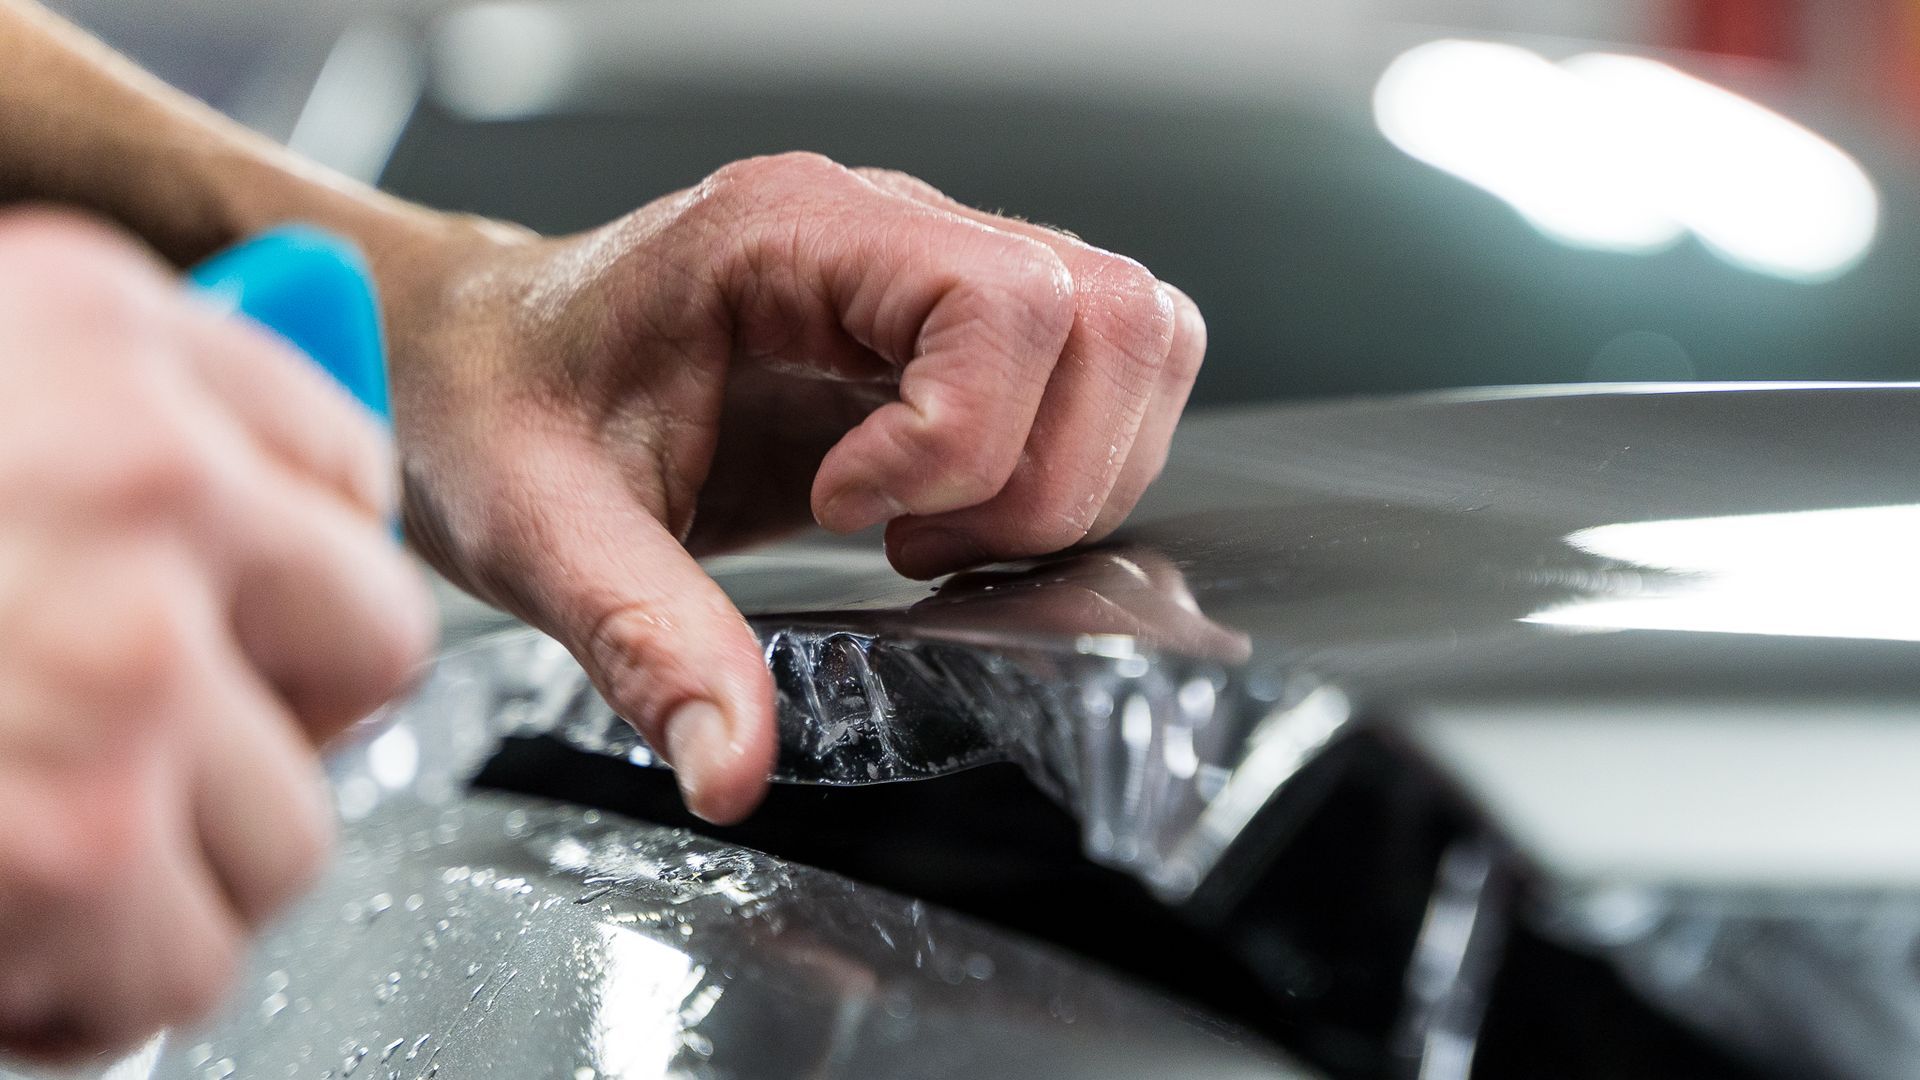 Satin Paint Protection Film - A person is applying a clear plastic covering to a car